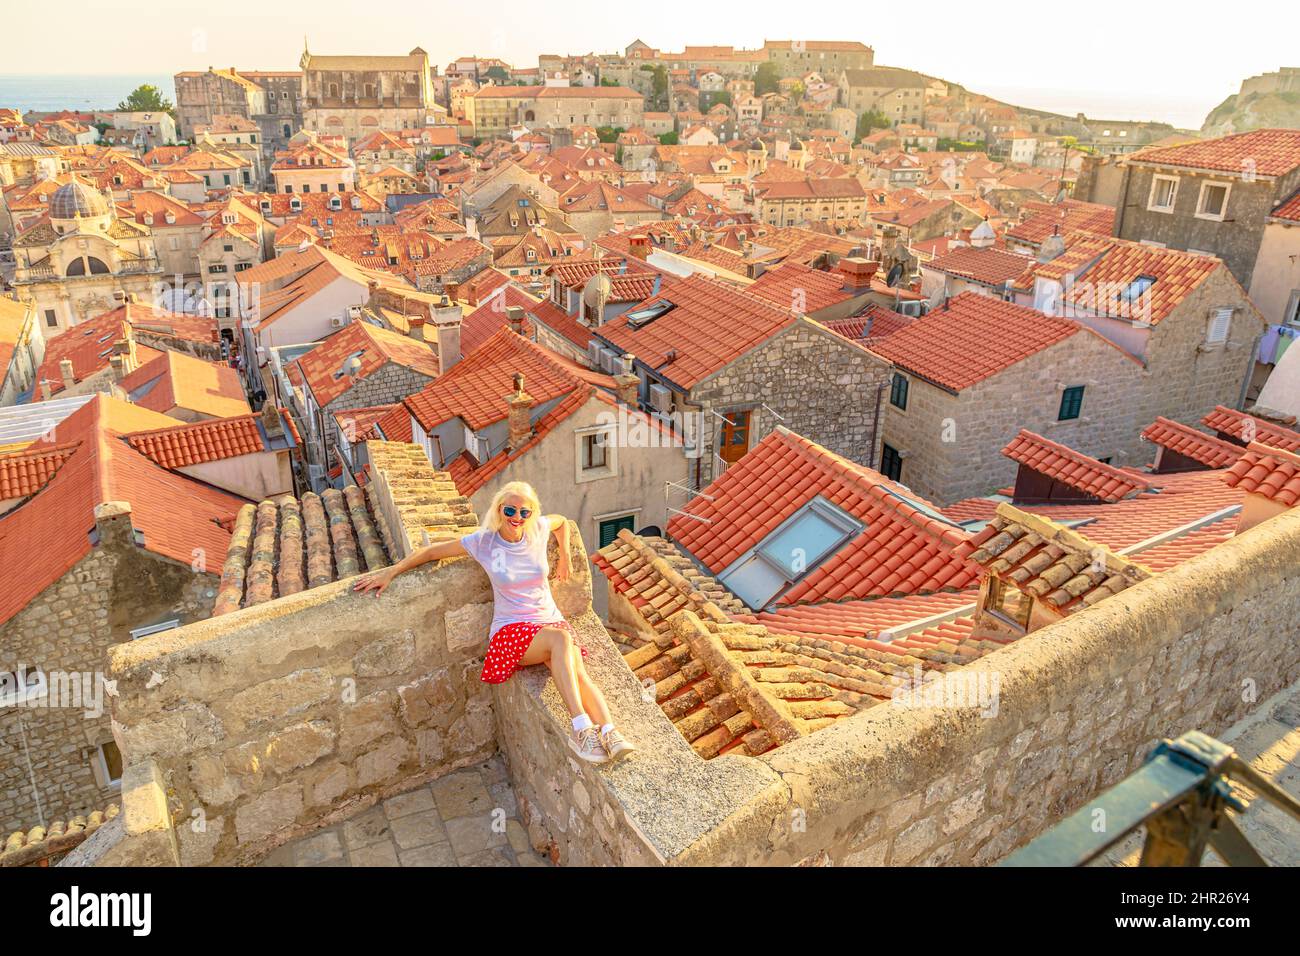 Aerial view of a woman on Dubrovnik walls at sunset in Croatia. View of Fort Lovrijenac fortress and church Crkva sv. Vlaho Saint Biagio of Dubrovnik Stock Photo